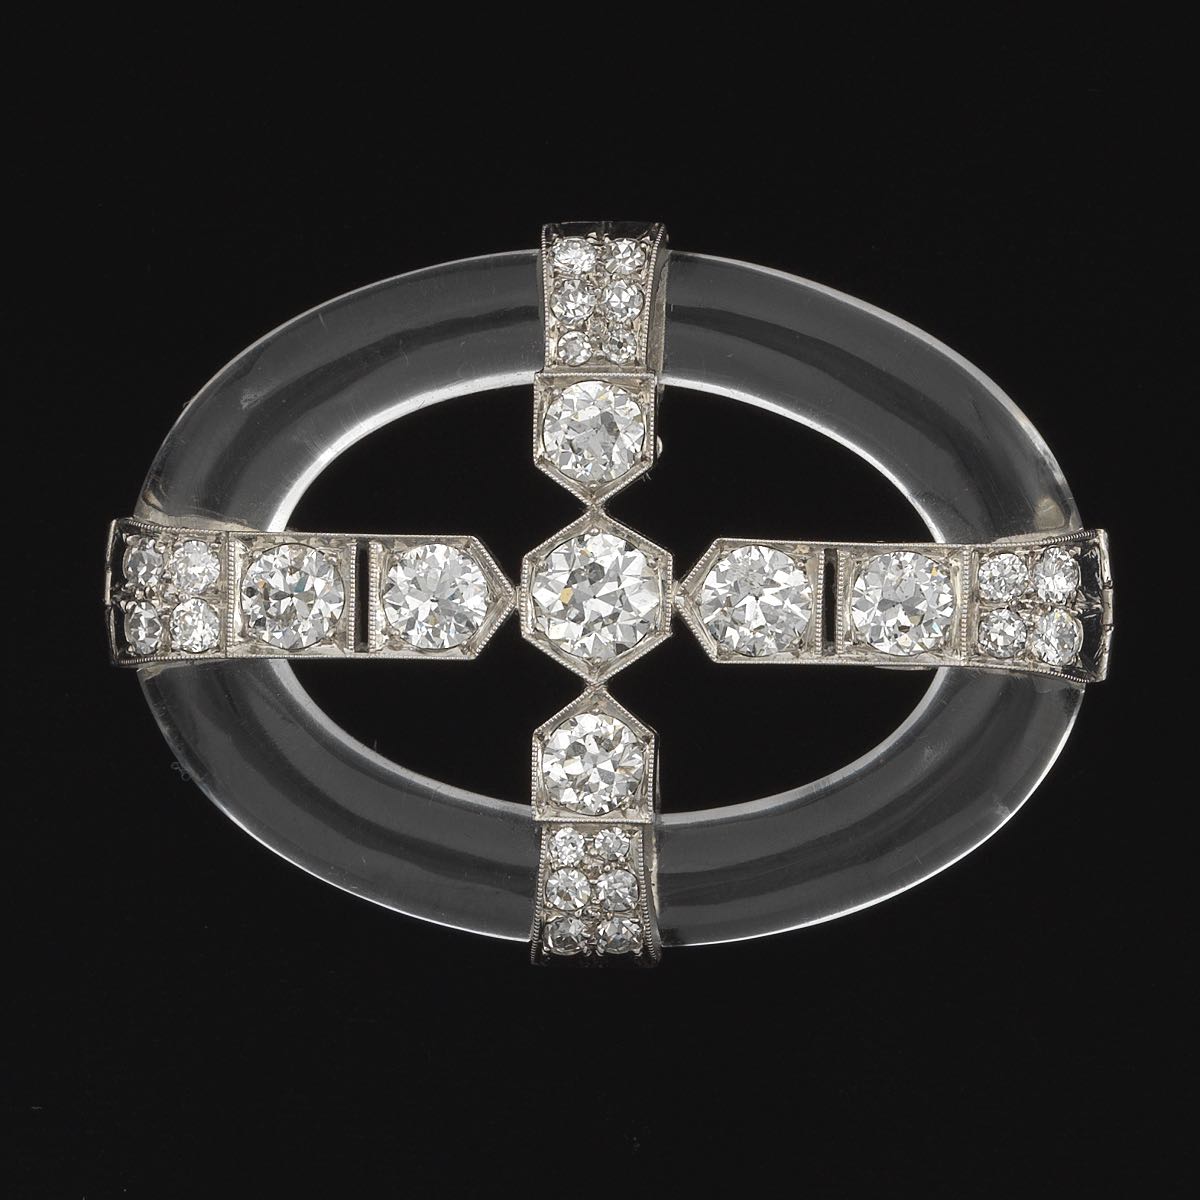 Diamond, Platinum and Rock Crystal Brooch  1-3/4 x 1-1/8 in. Oval shape brooch comprised of carved - Image 2 of 4